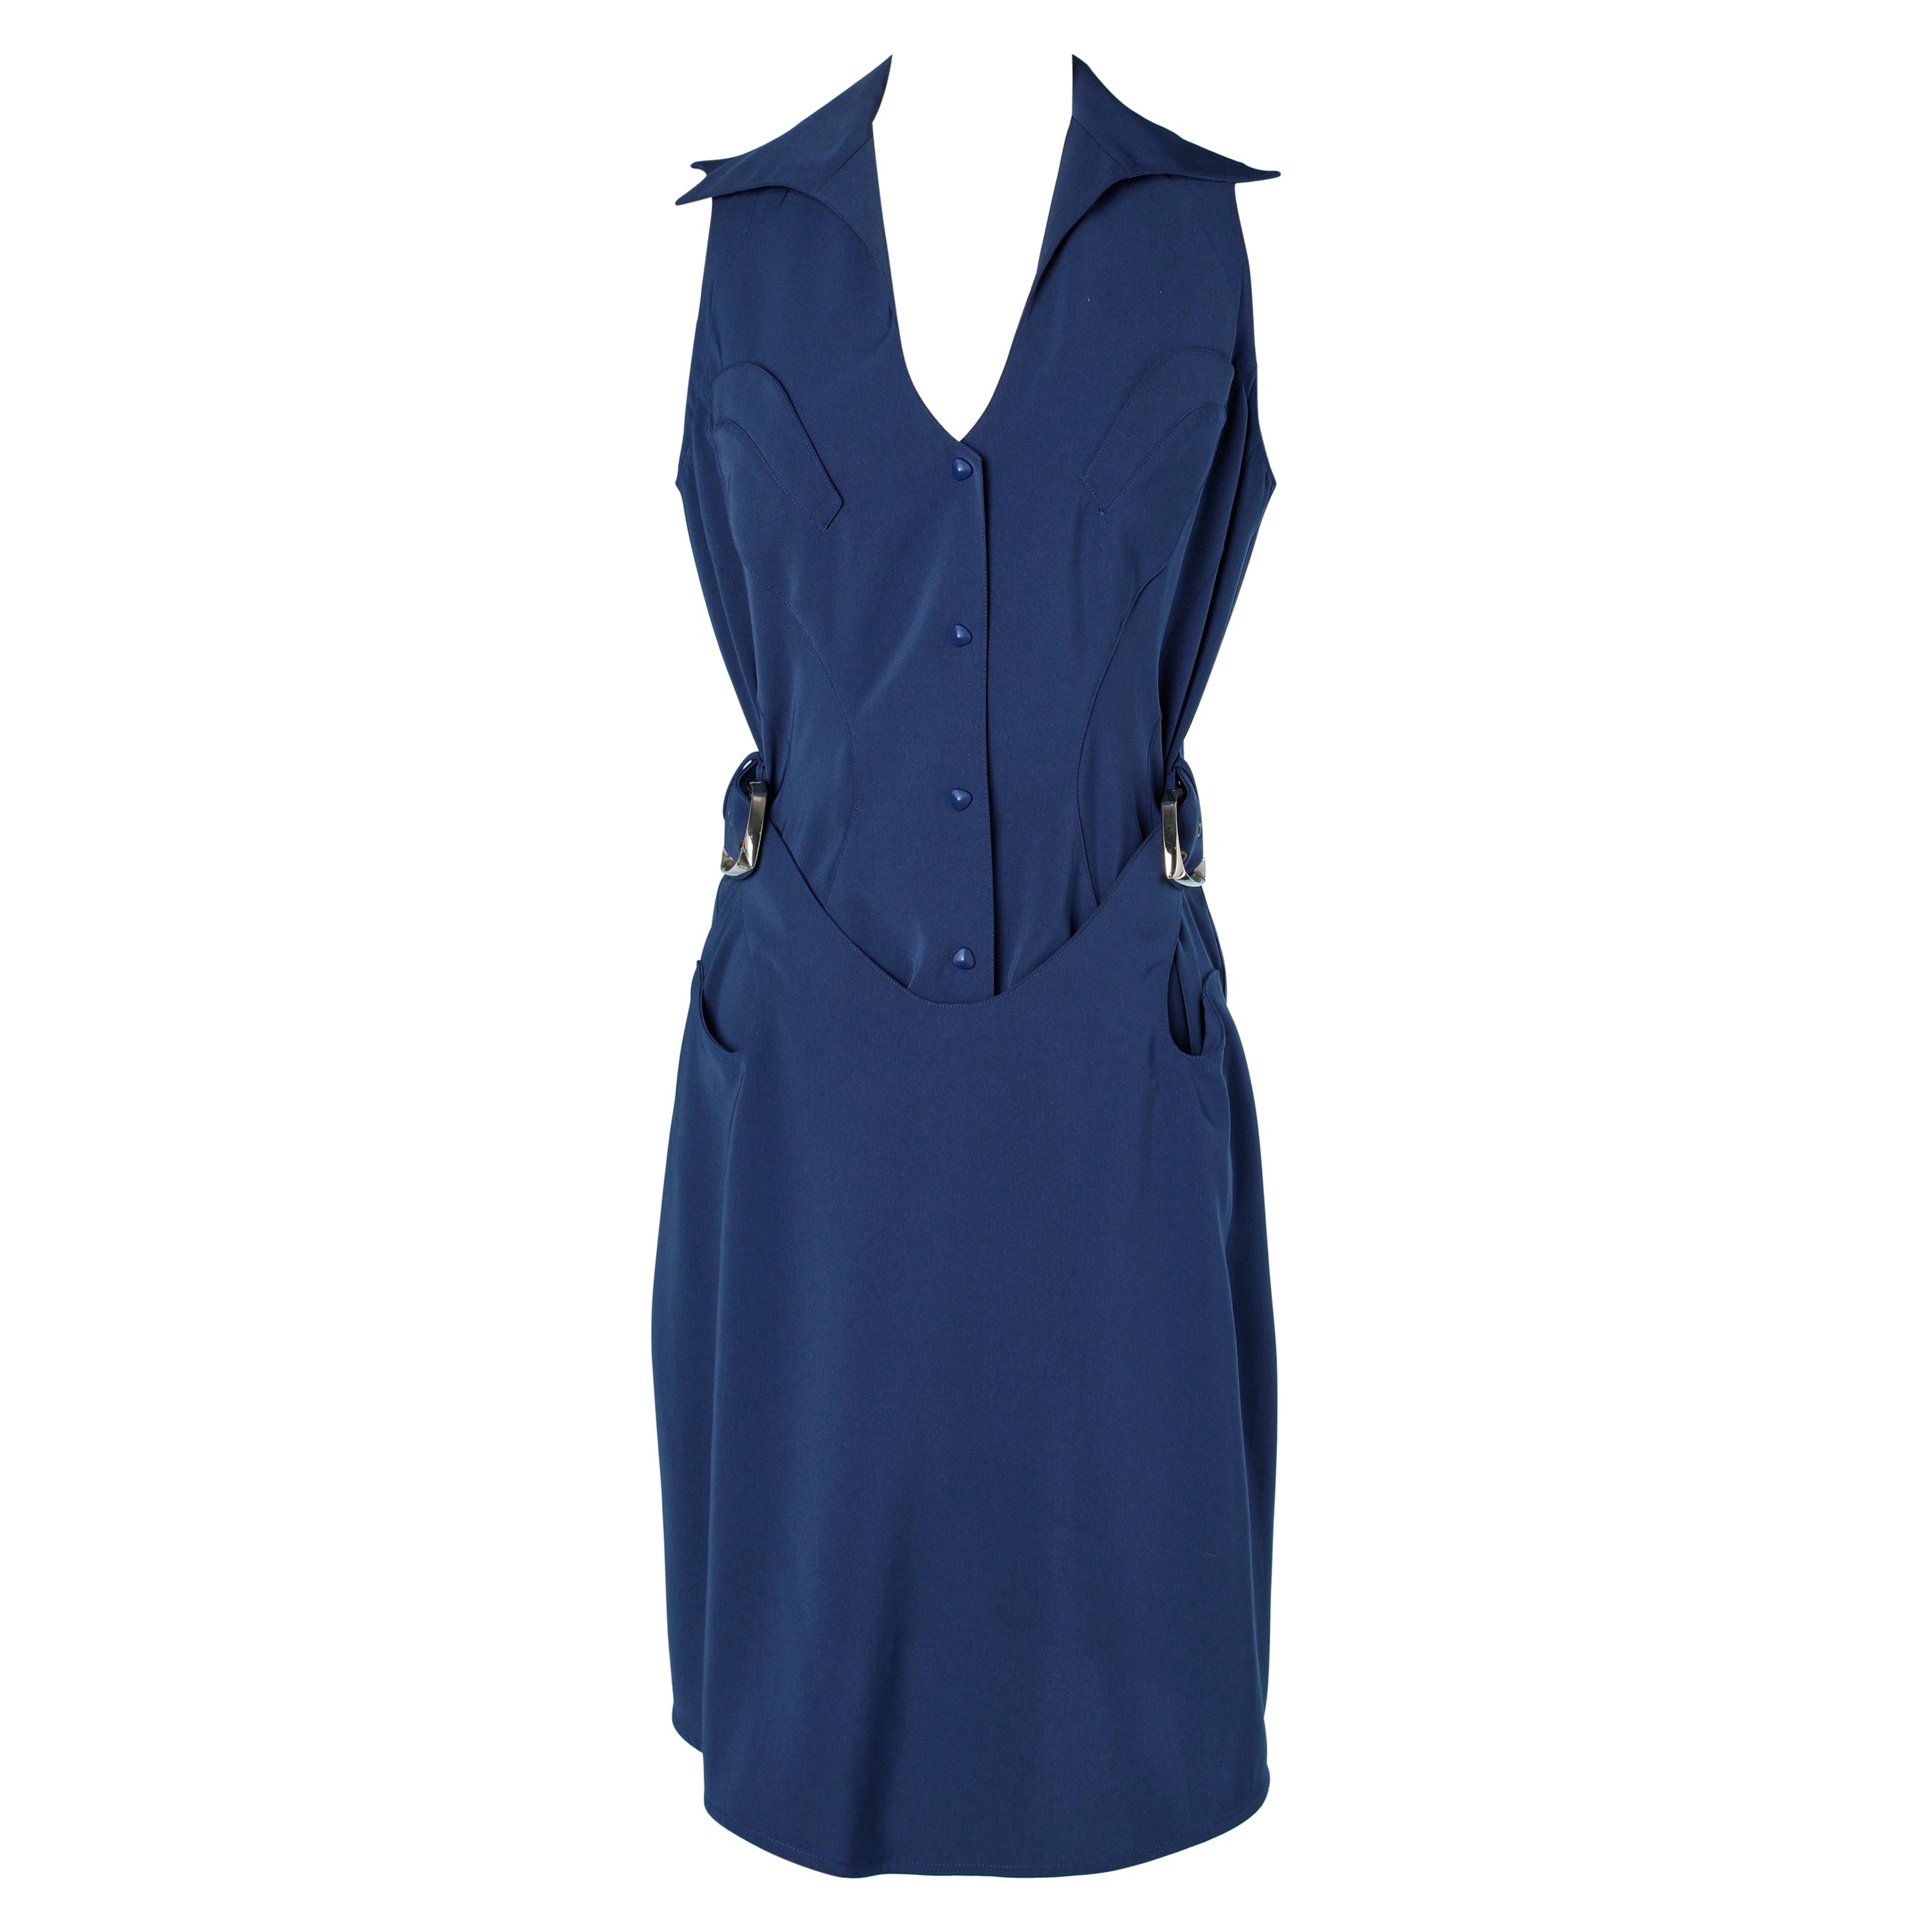 Blue wrap dress with metal buckles Thierry Mugler 